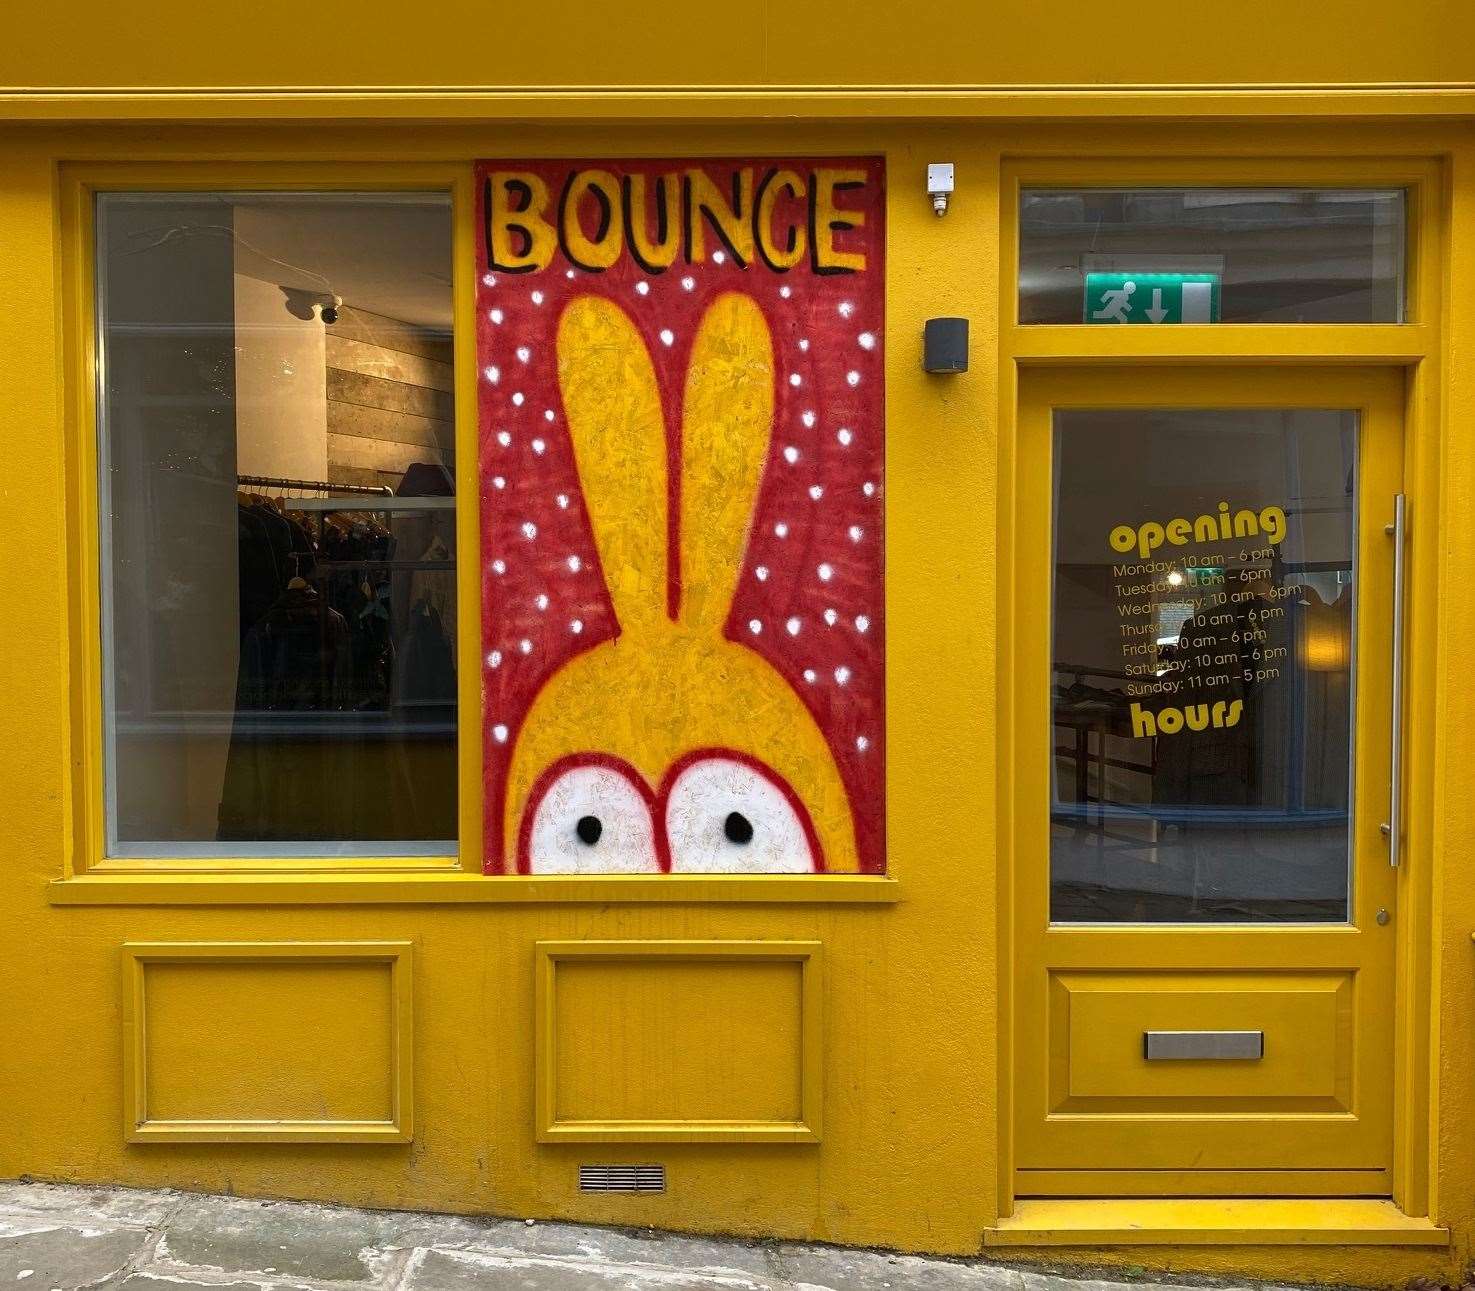 The owners of Bounce Vintage had their shop window smashed during the spree. They have since put boarding up, painted by artist Duncan Weston. Picture credit: Bounce Vintage